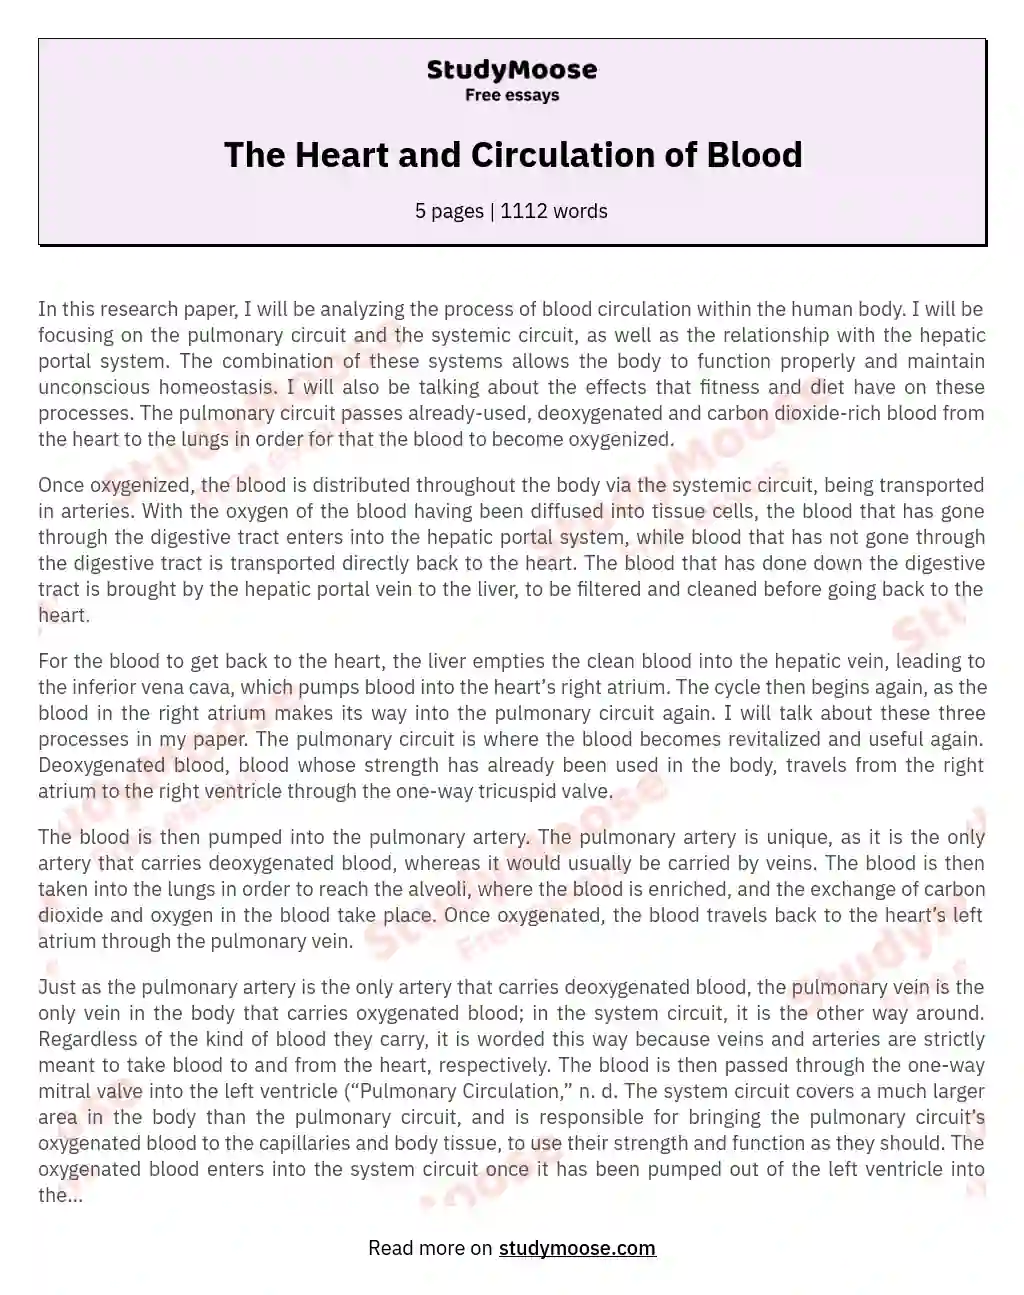 The Heart and Circulation of Blood essay